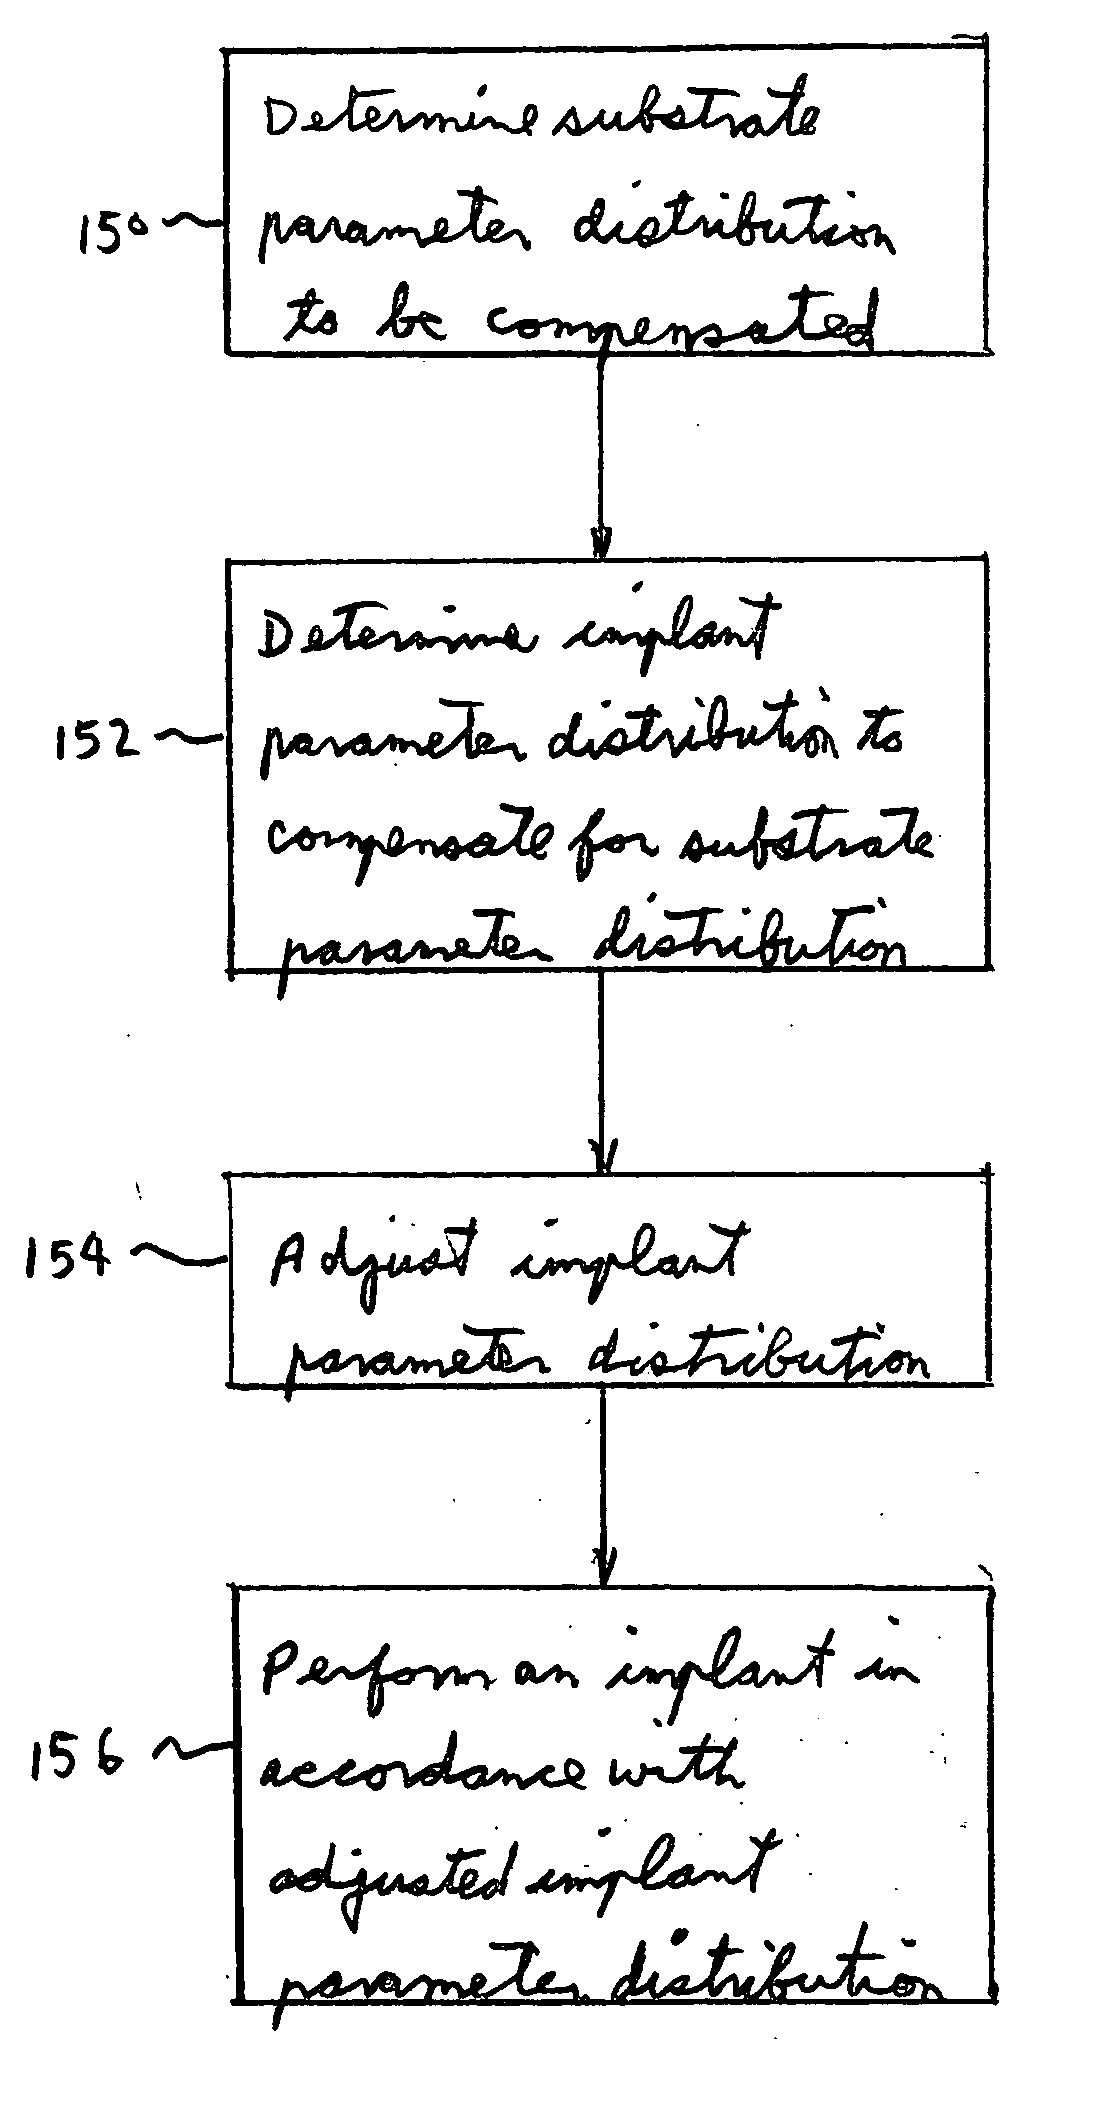 Methods and apparatus for adjusting ion implant parameters for improved process control